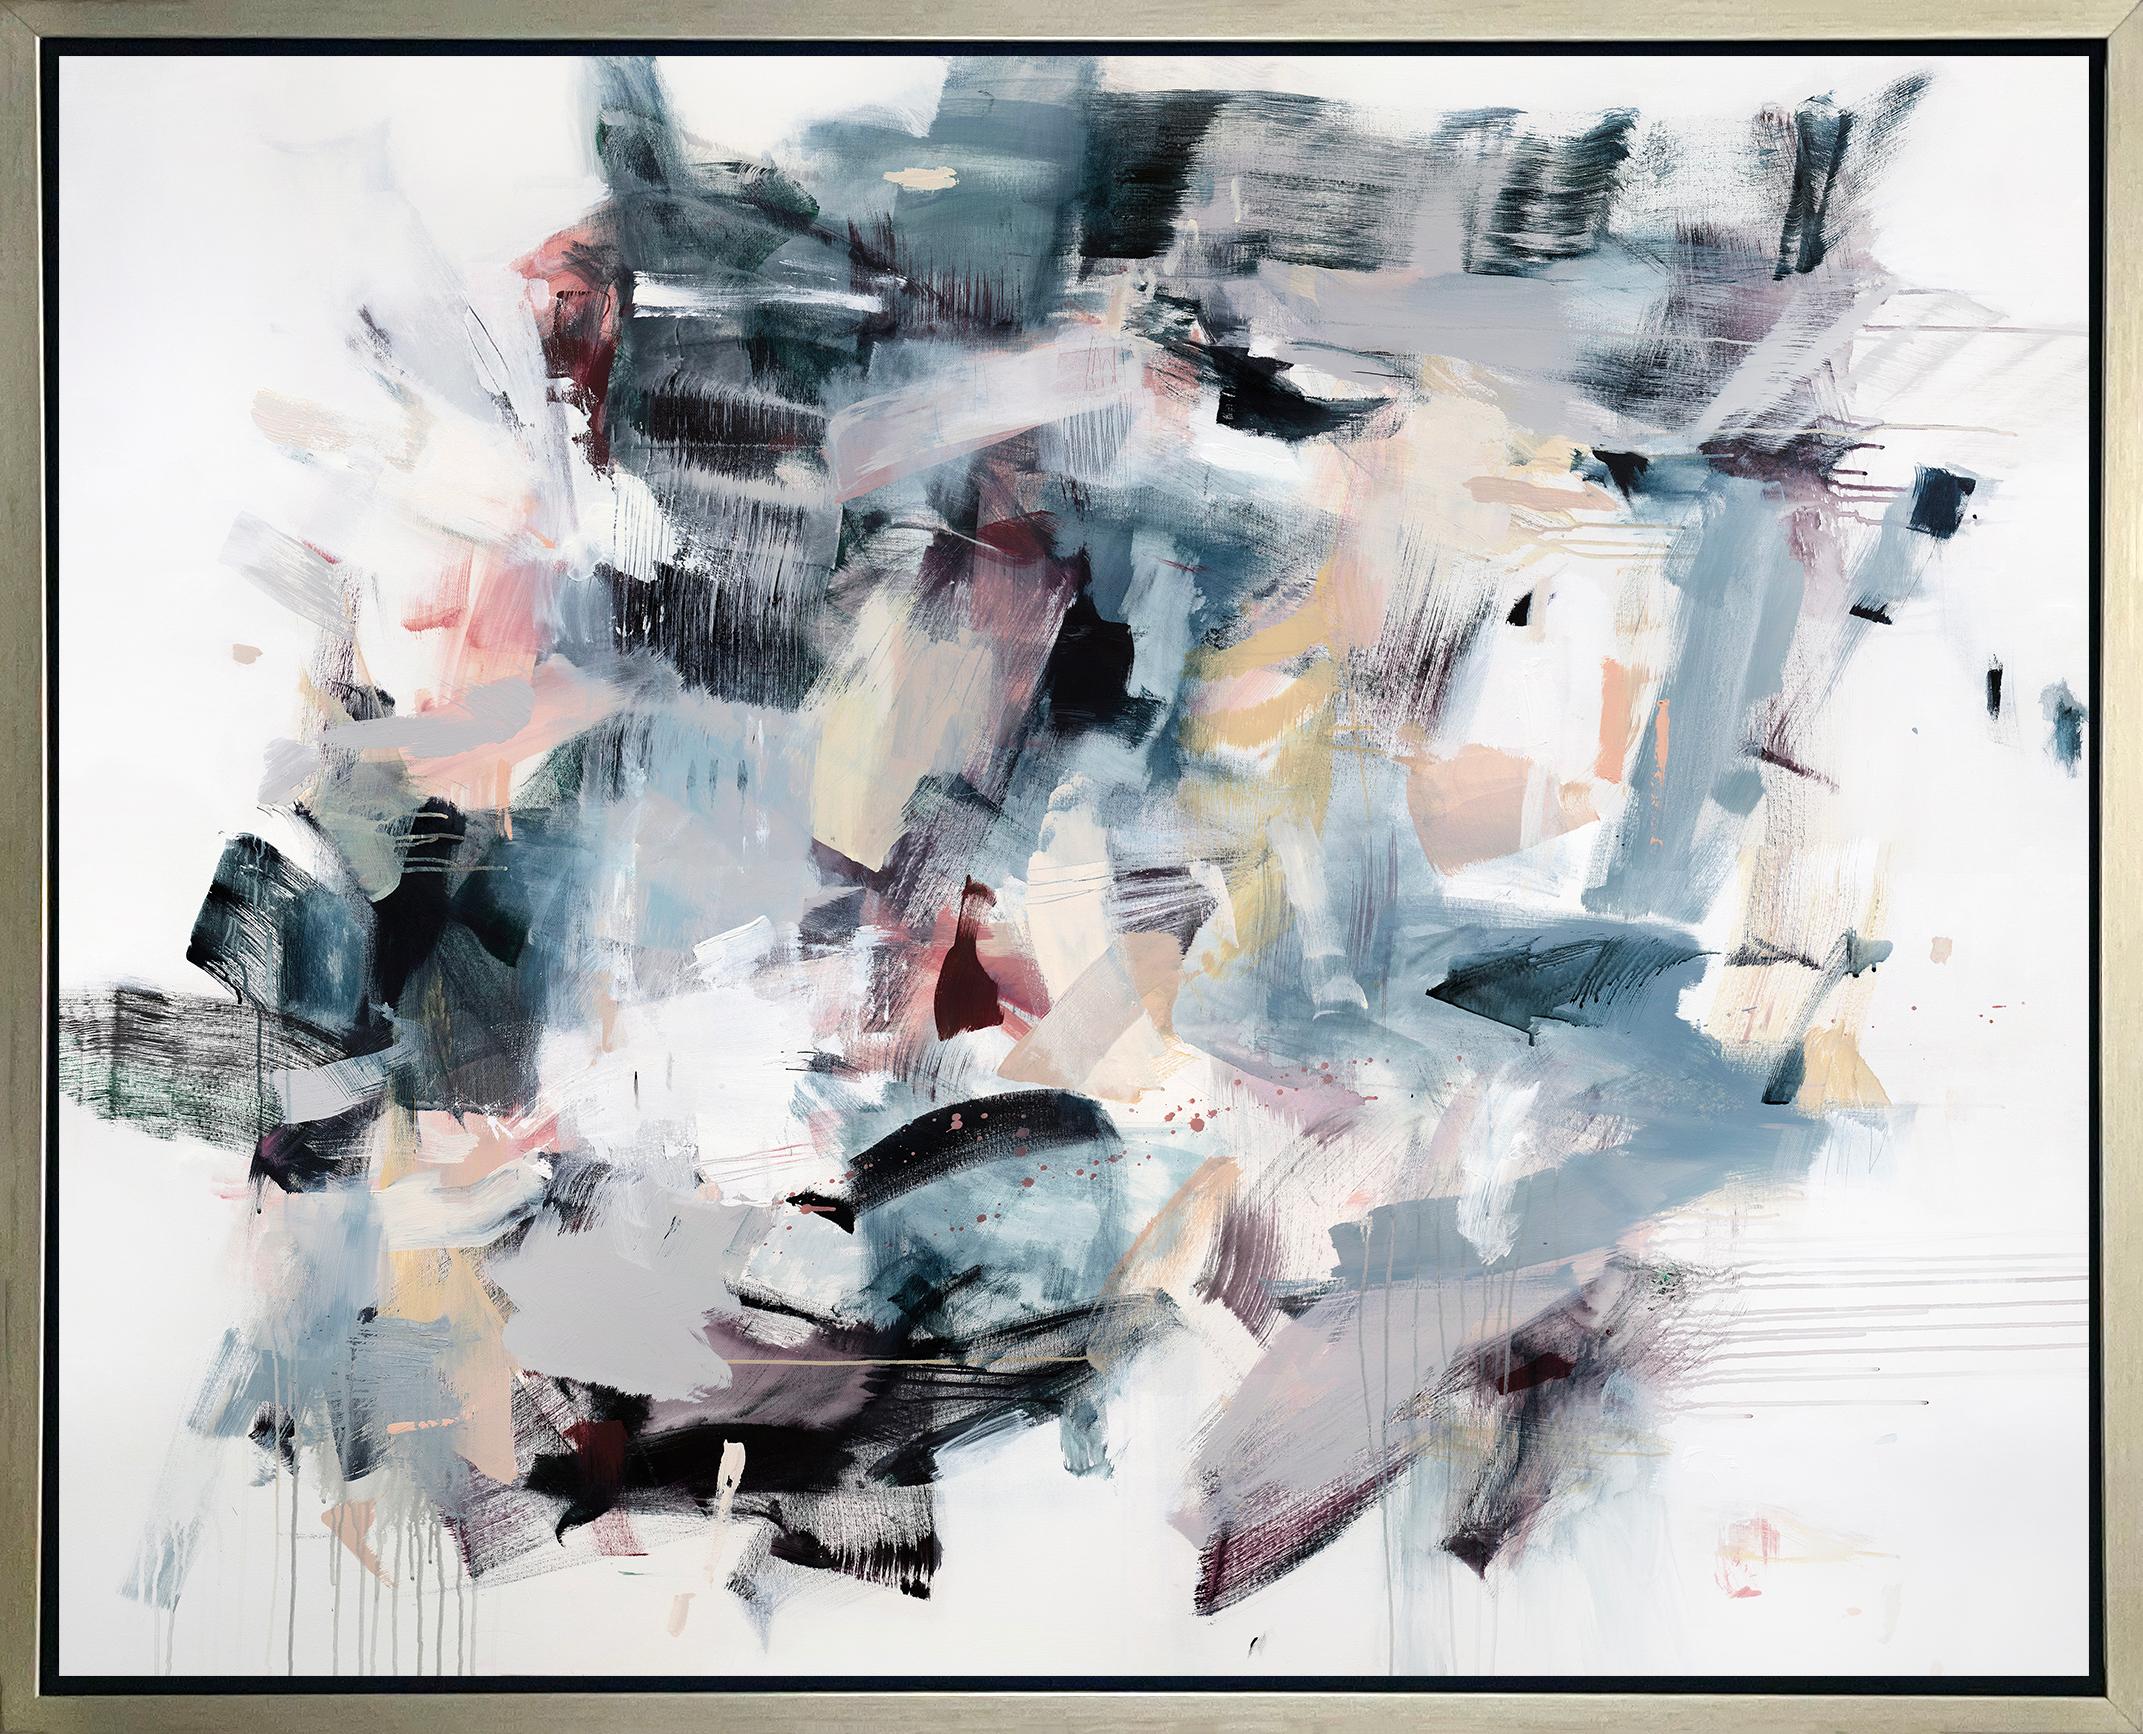 Kelly Rossetti Abstract Print - "Serotonin Overflow, " Framed Limited Edition Giclee Print, 36" x 45"